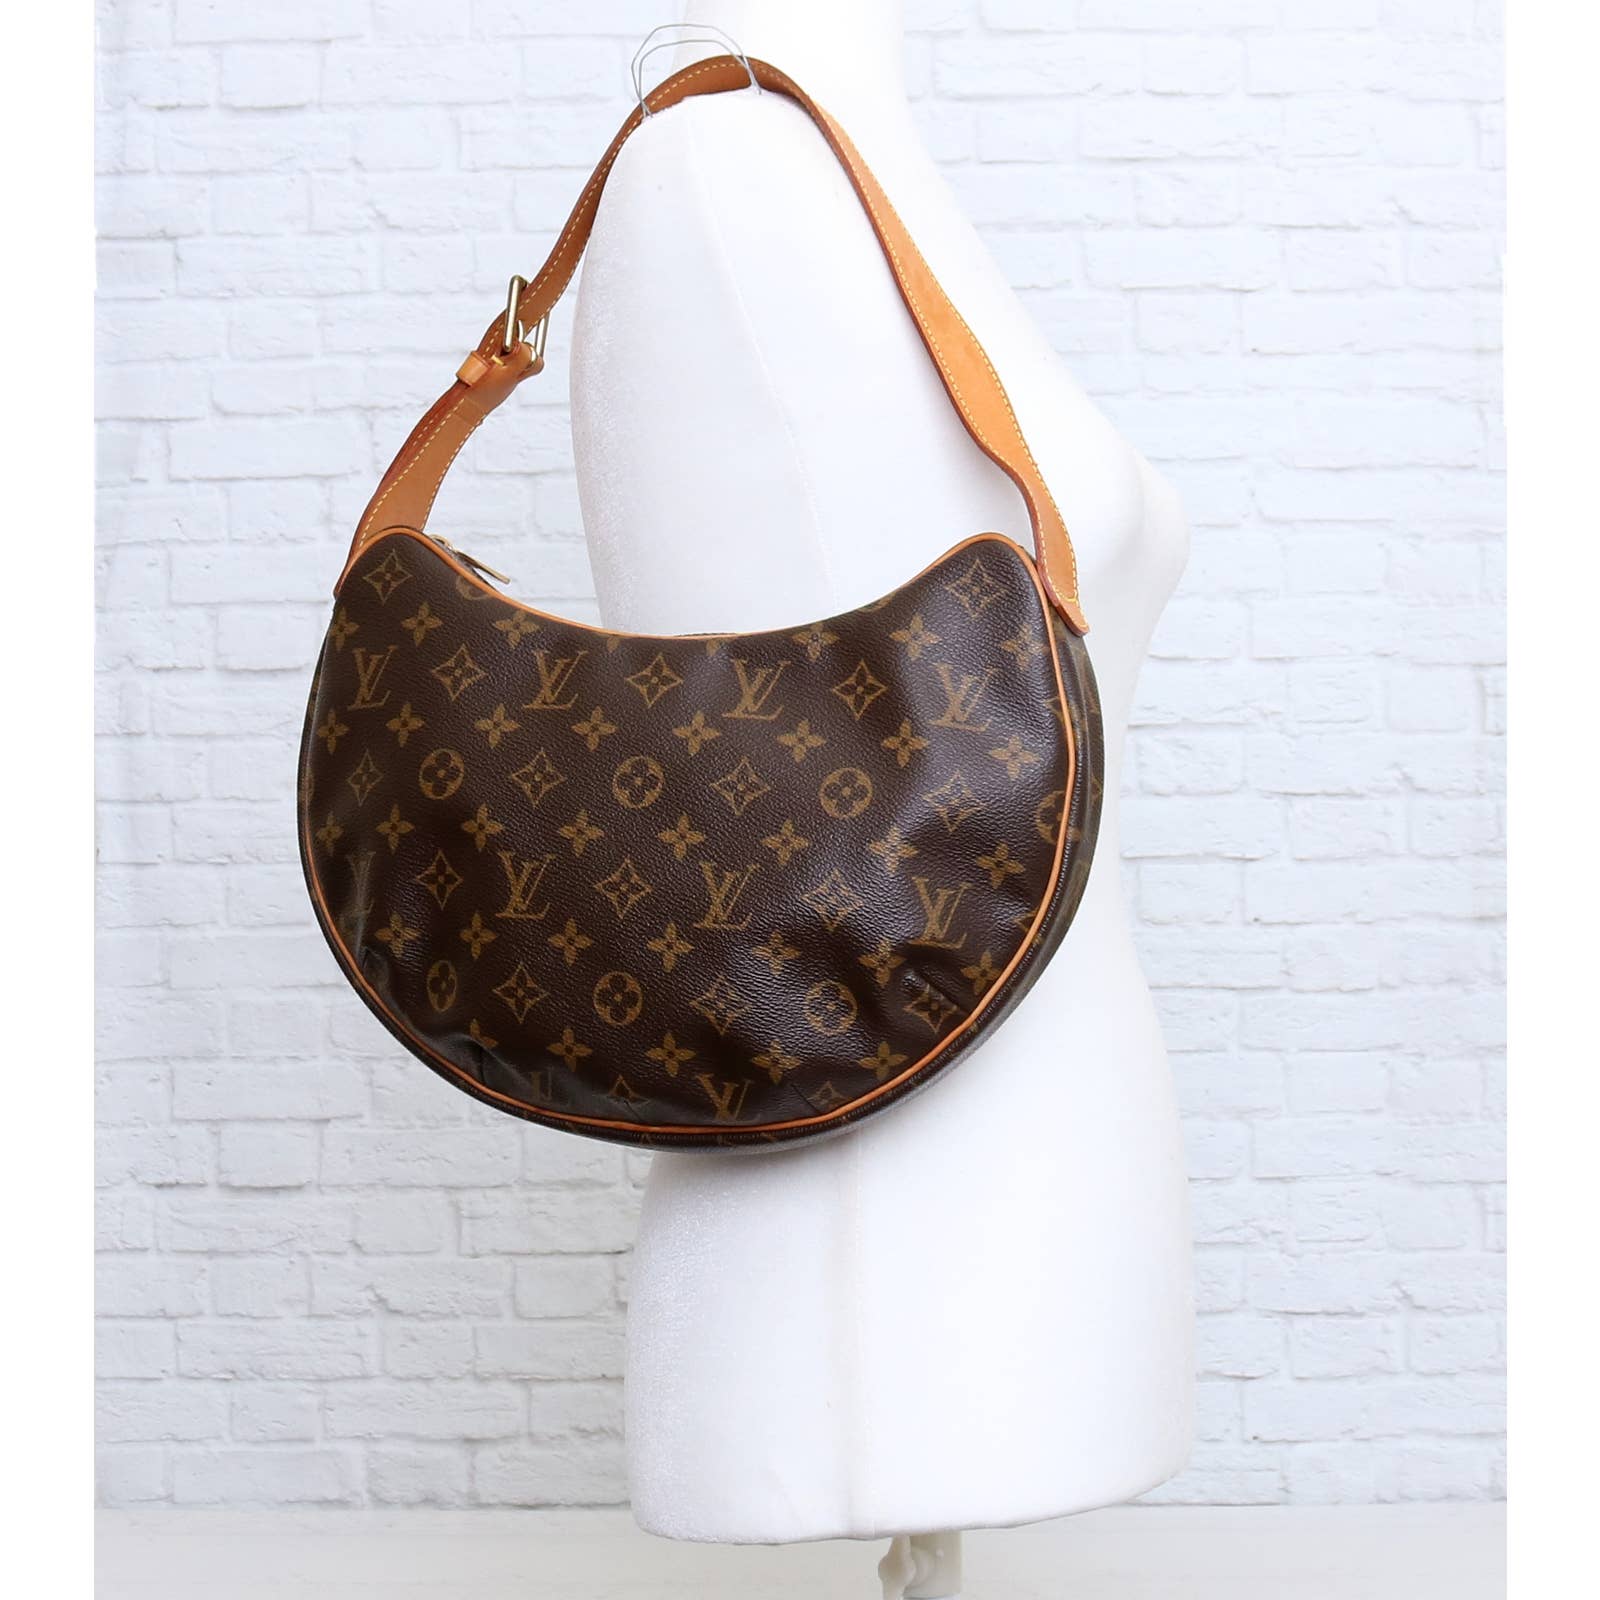 Louis Vuitton Odeon Monogram MM REVIEW- What fits inside? Mod